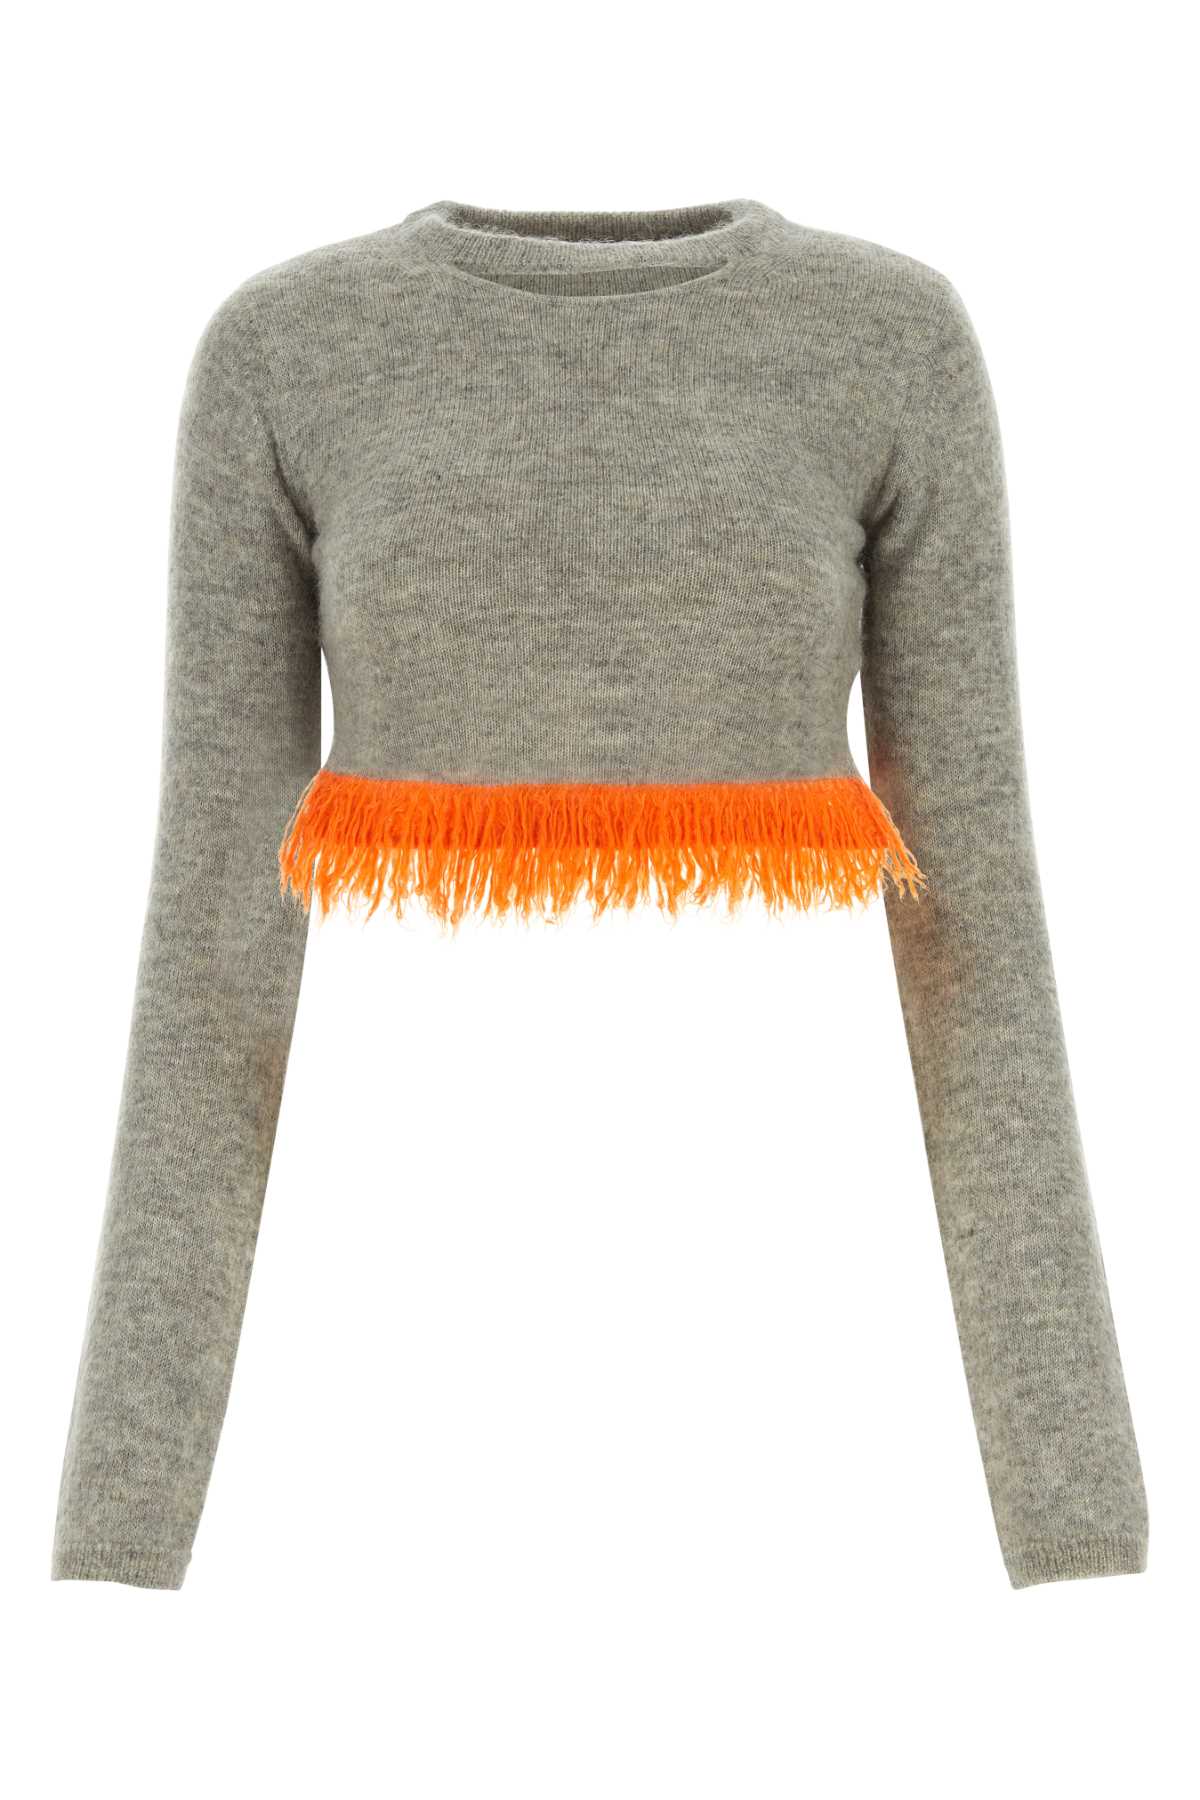 J.W. Anderson Grey Mohair Blend Sweater